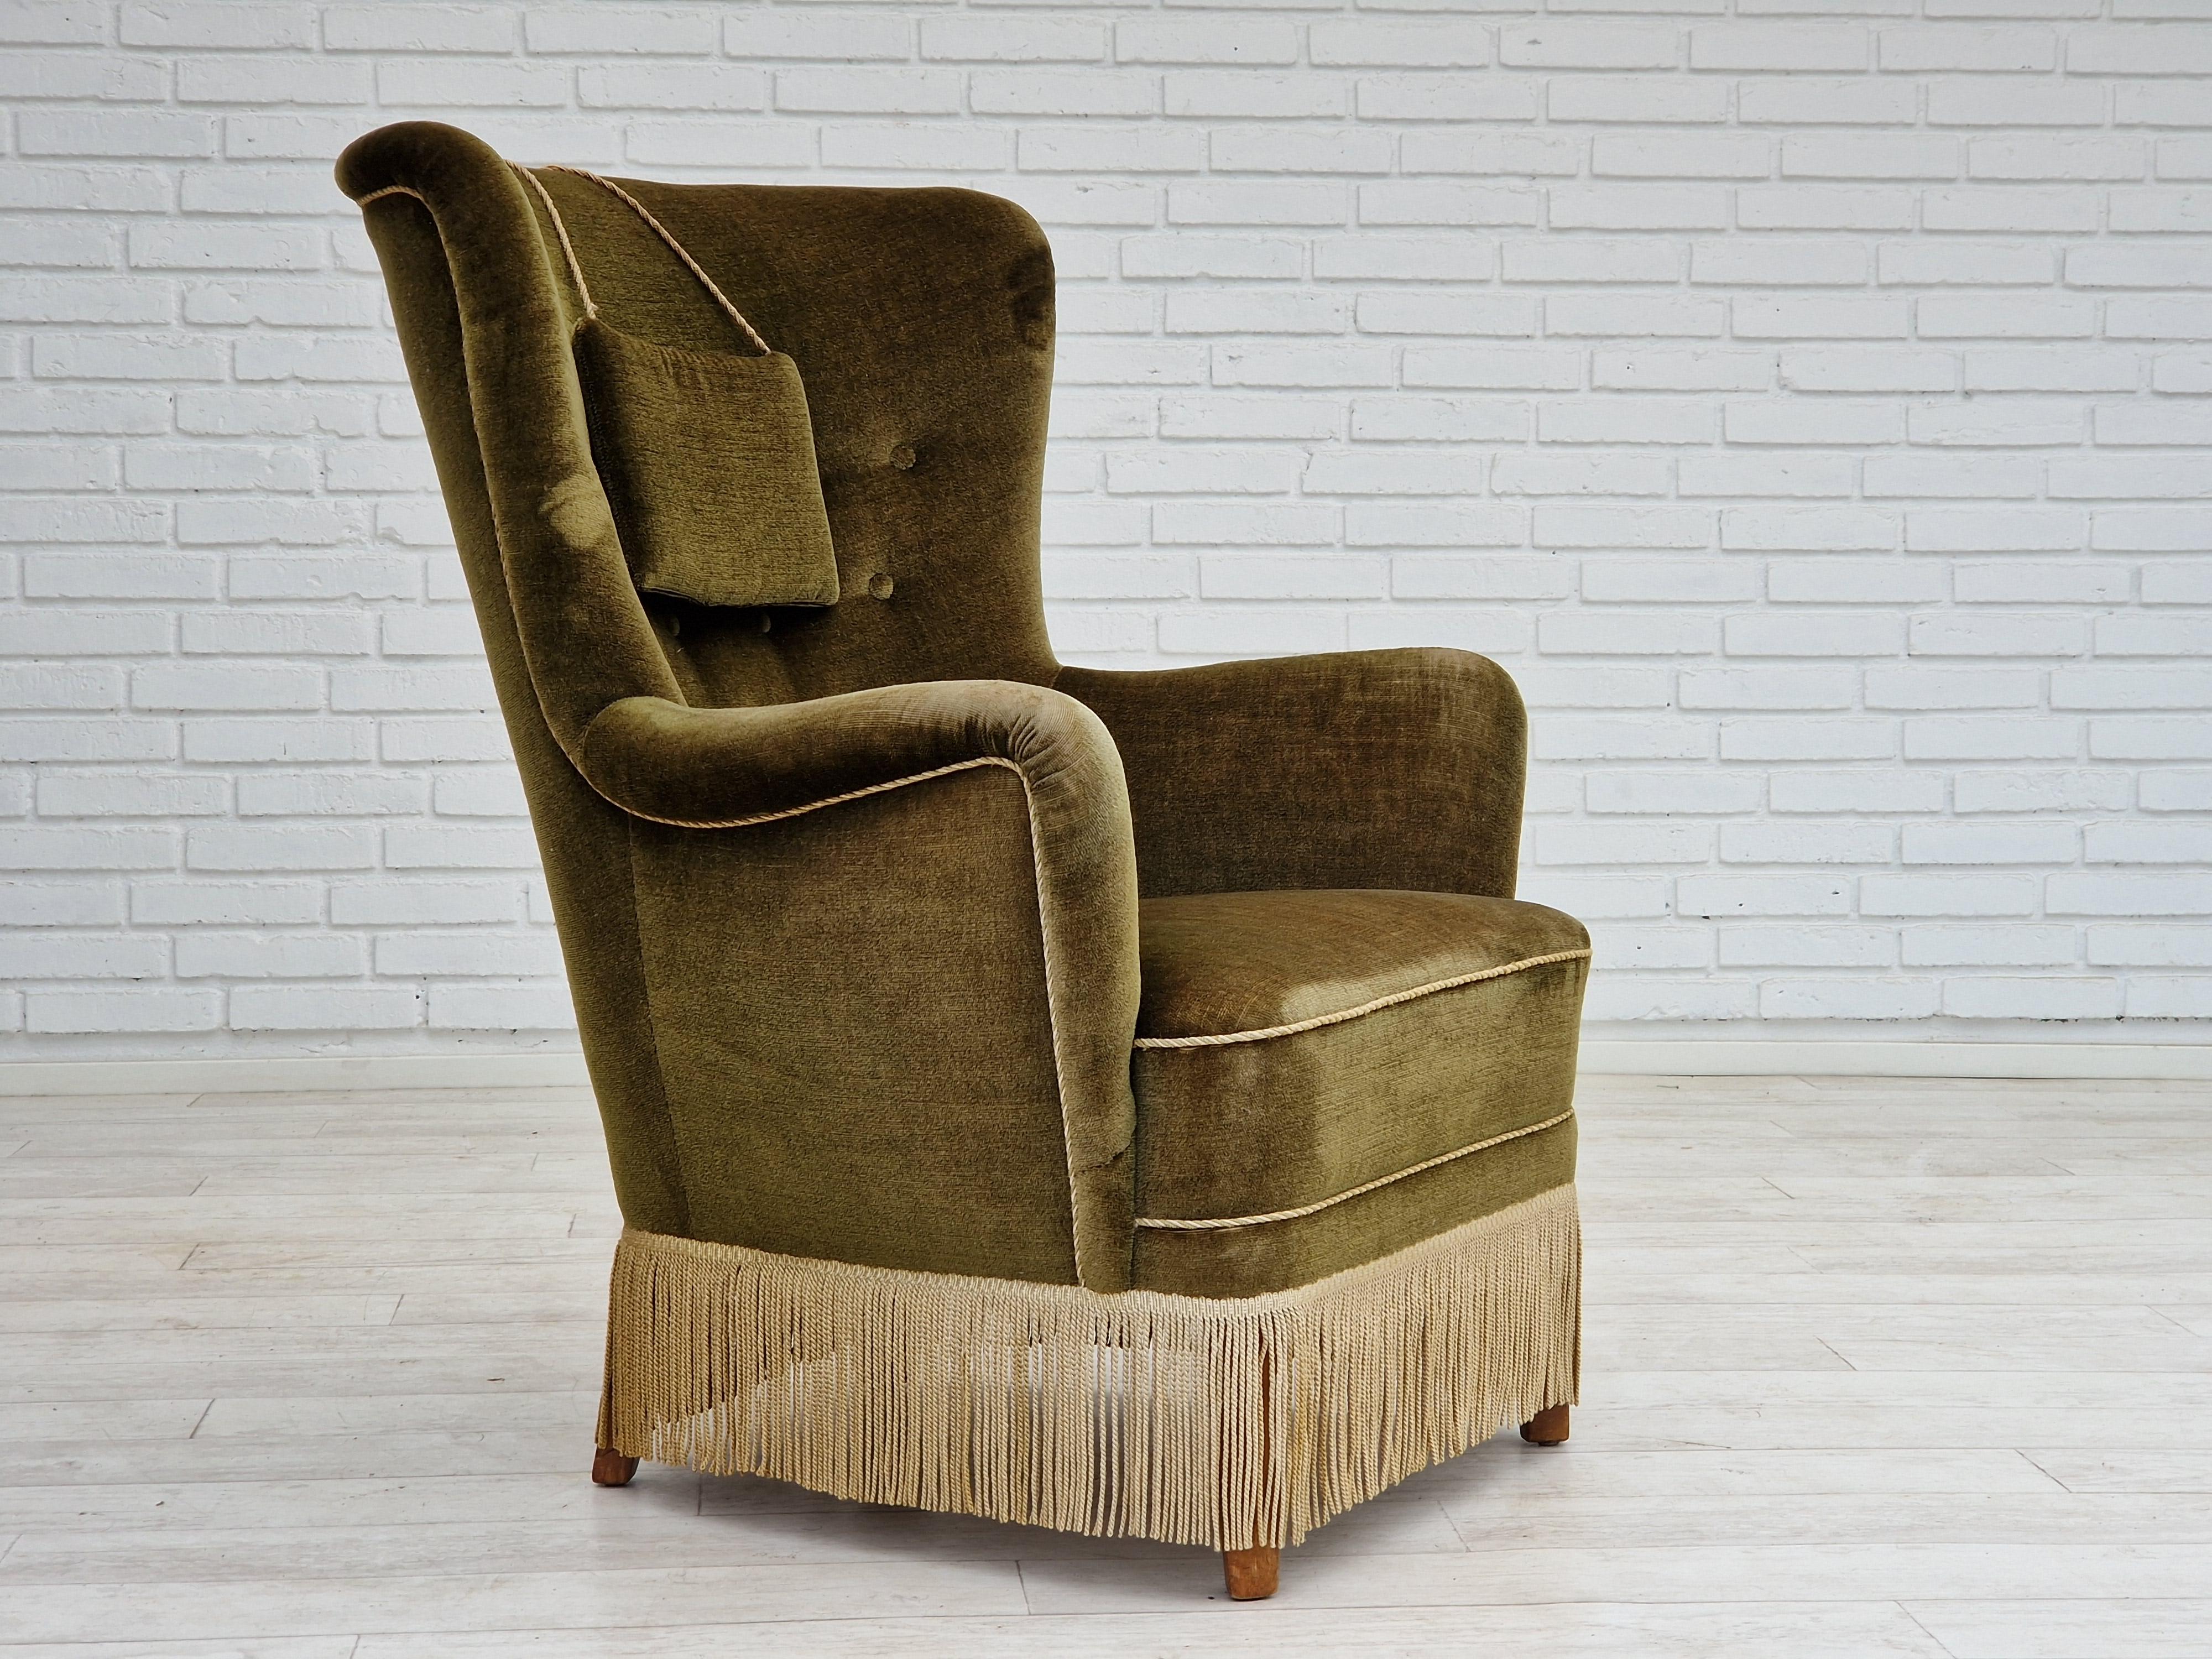 1960s, Danish design. Highback armchair in original good condition: no smells and no stains. Original green velour, springs in the seat, beech wood legs. Light wear/patina on armrest. Made by Danish furniture manufacturer in about 1960.